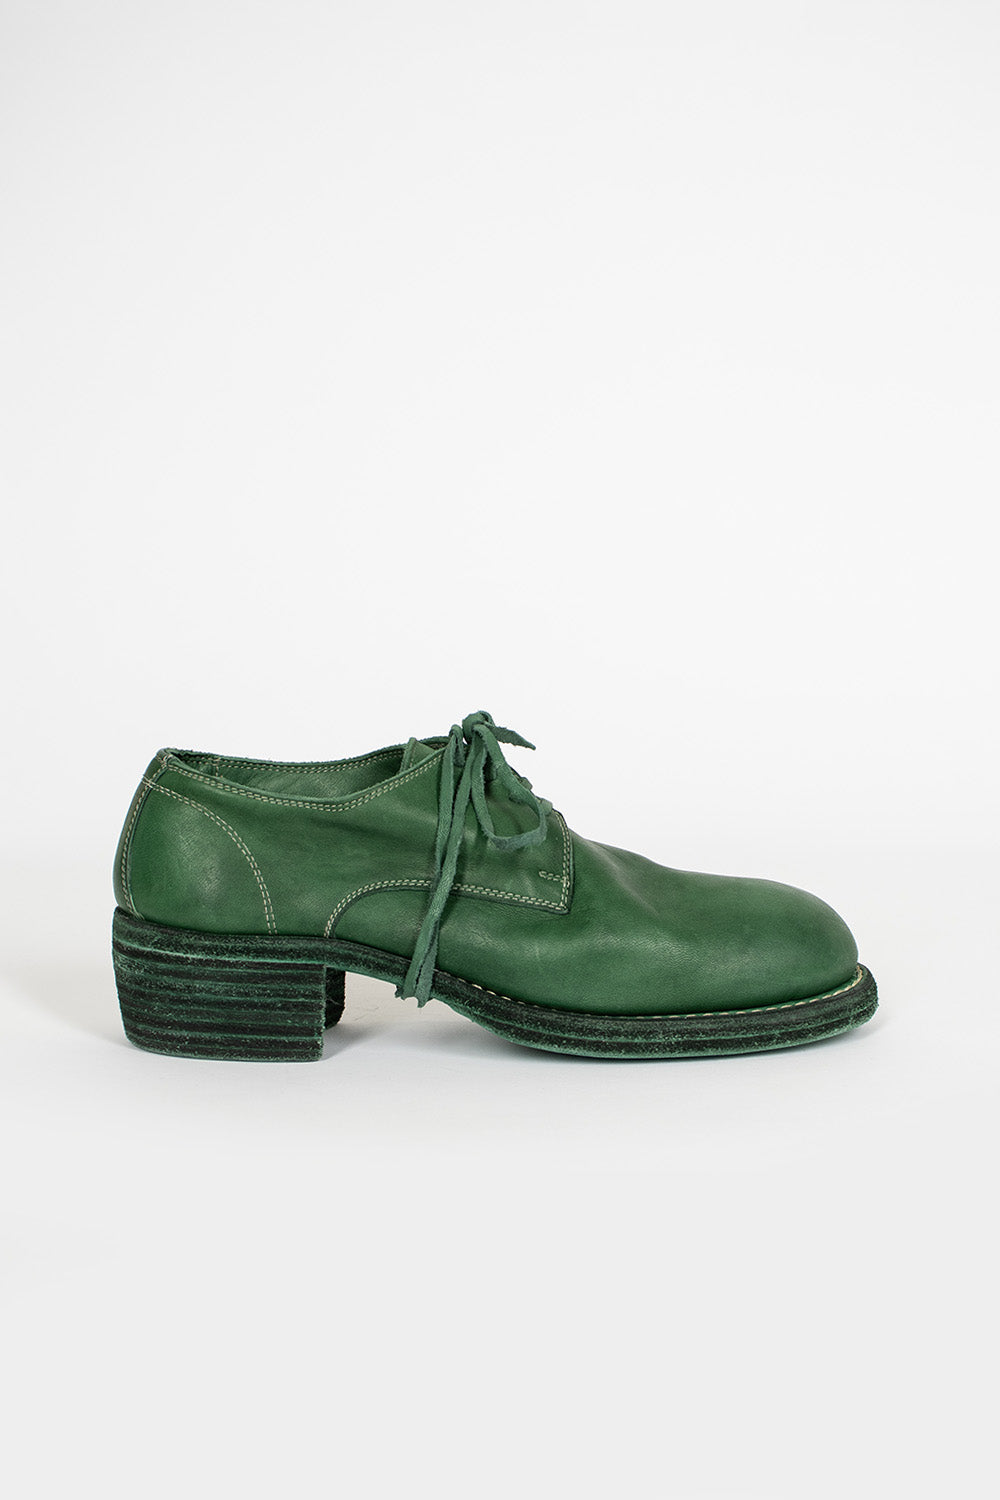 Guidi leather derby shoes - Green